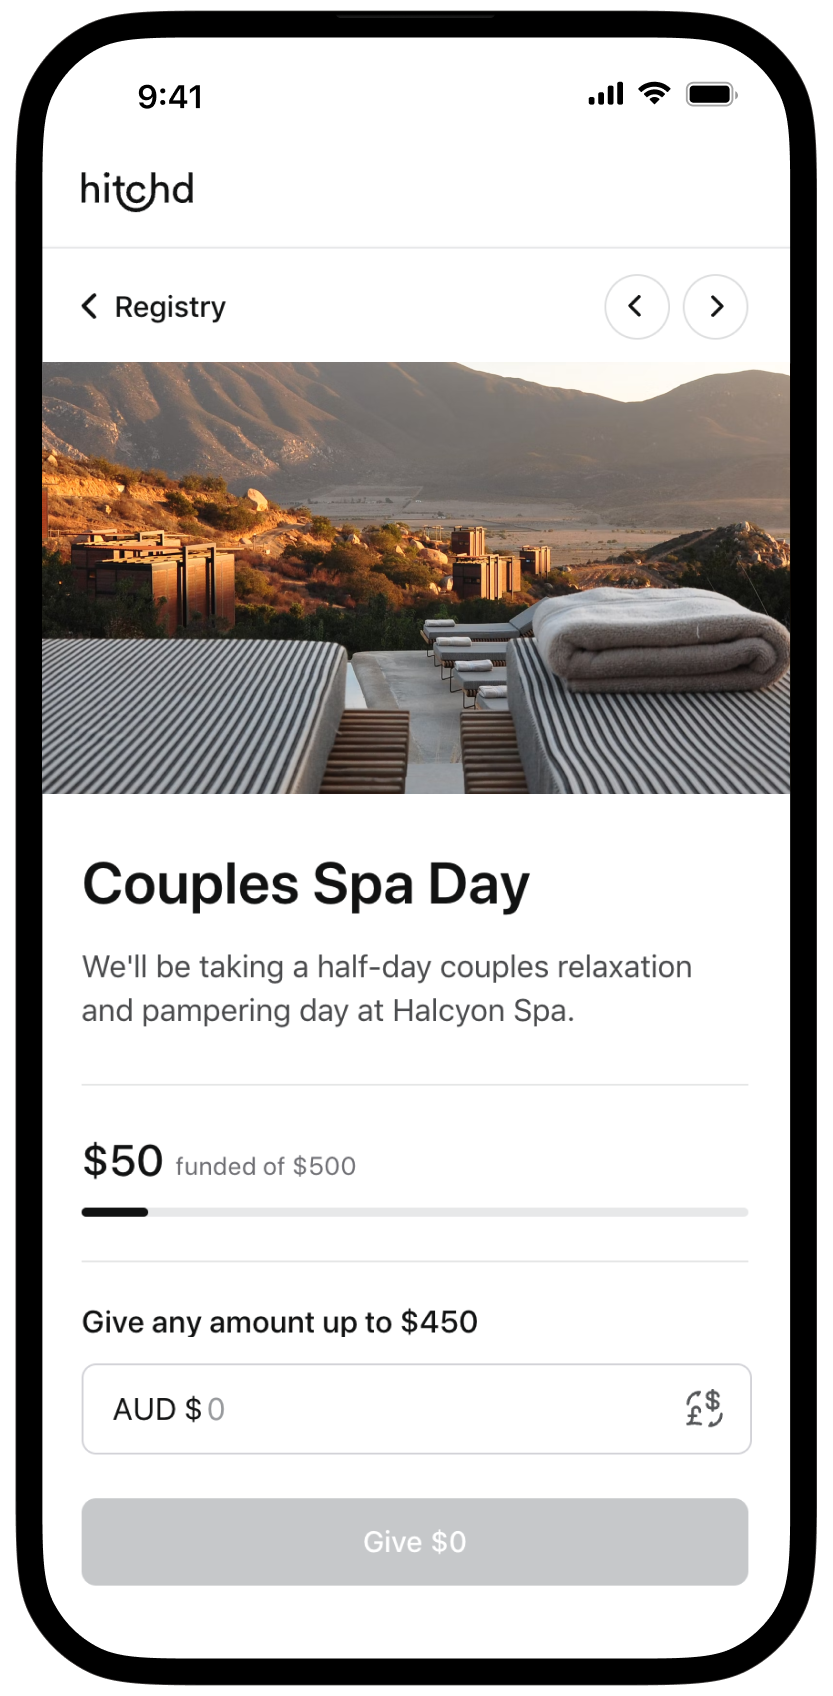 A couples spa date